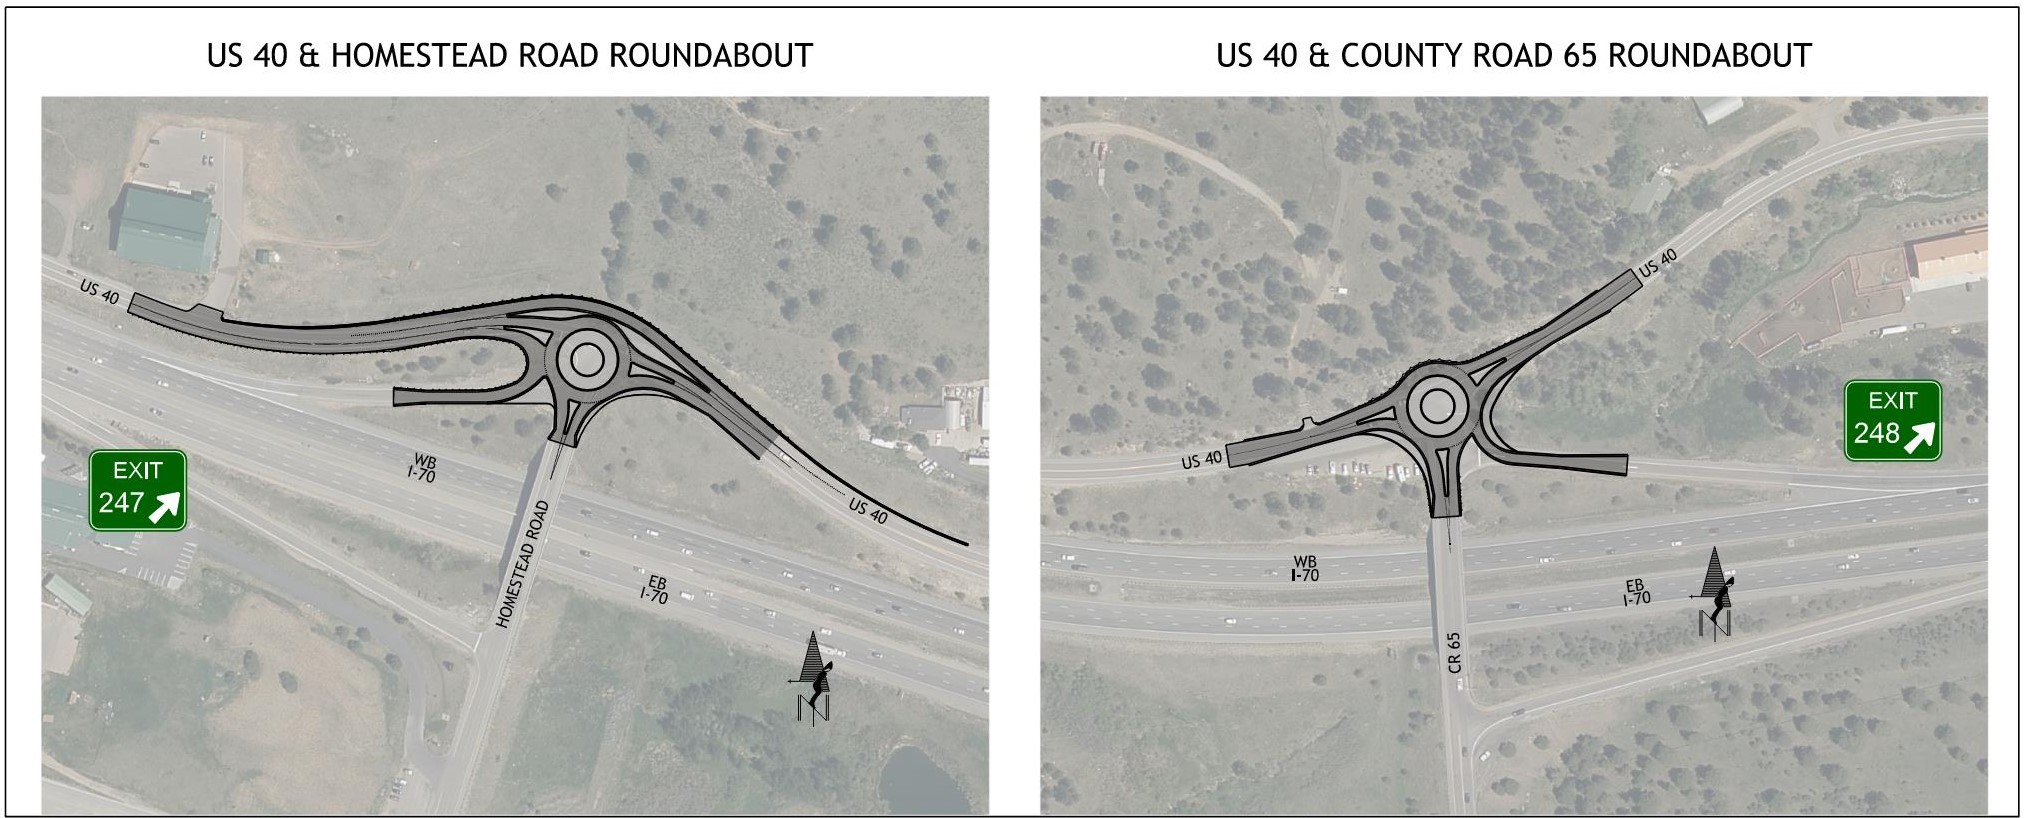 Floyd Hill Roundabouts.jpg detail image